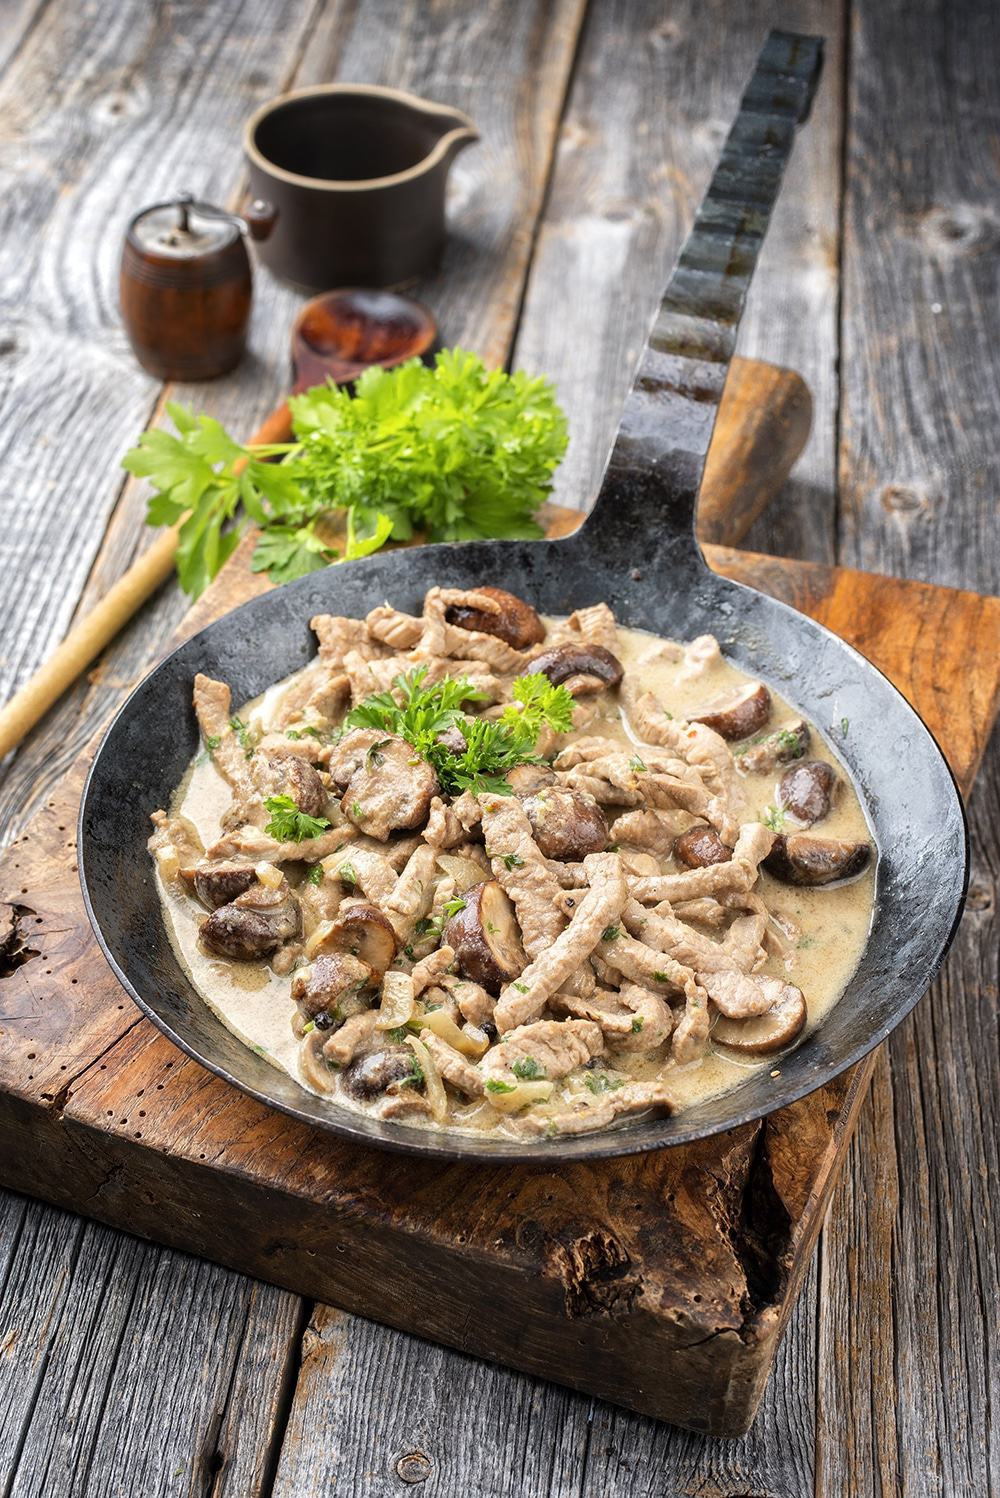 Geschnetzeltes With Spaetzle Is A Match Made In Heaven | Cooking Clue